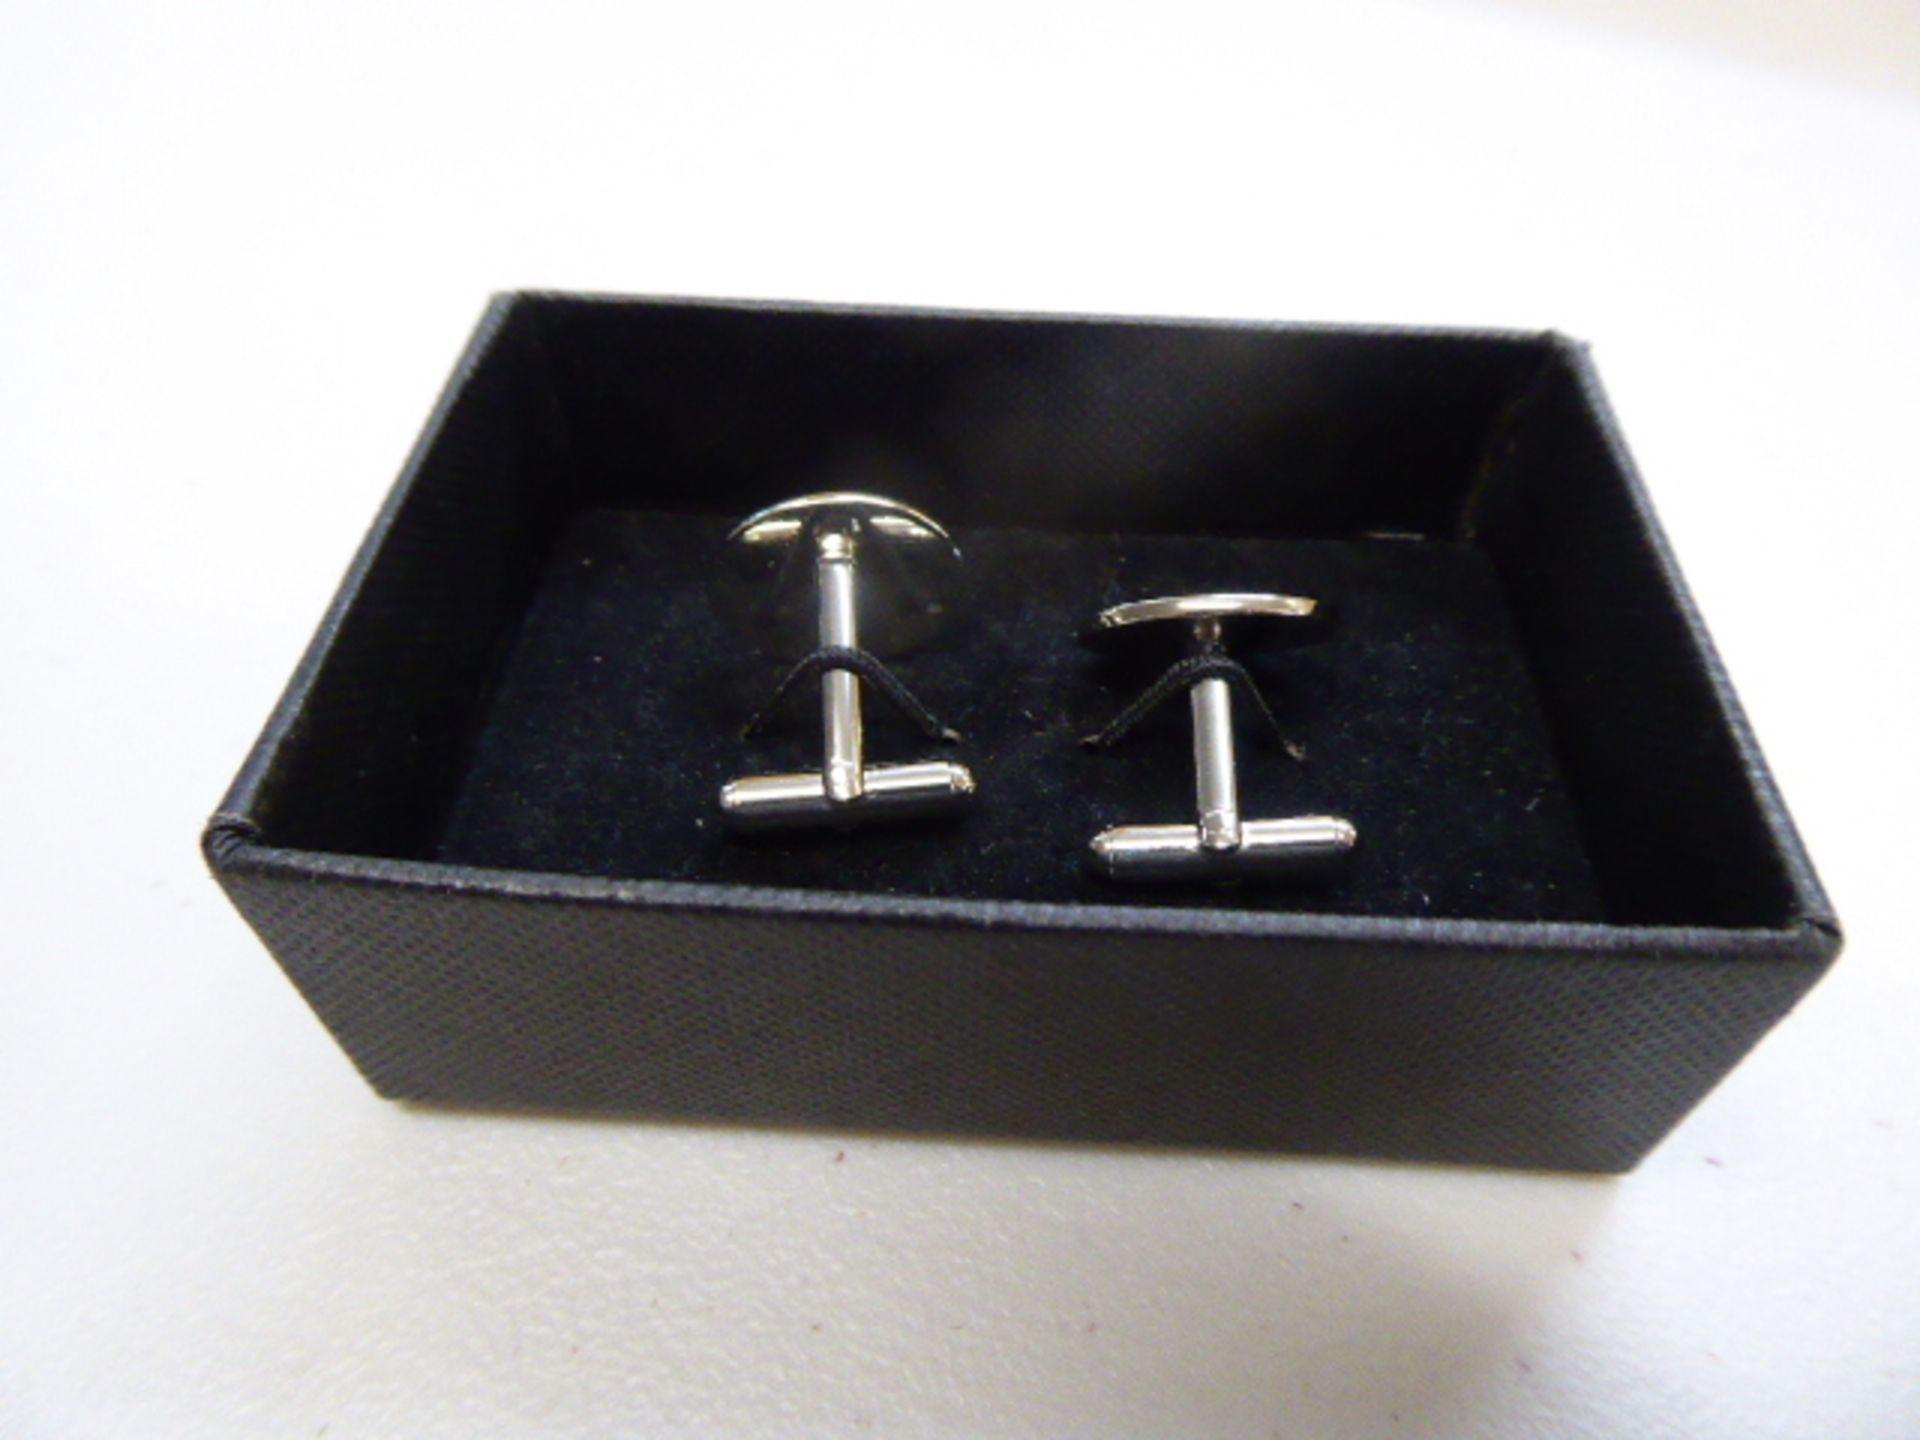 Approximately 900 oval cufflinks in presentation boxes - Image 2 of 4